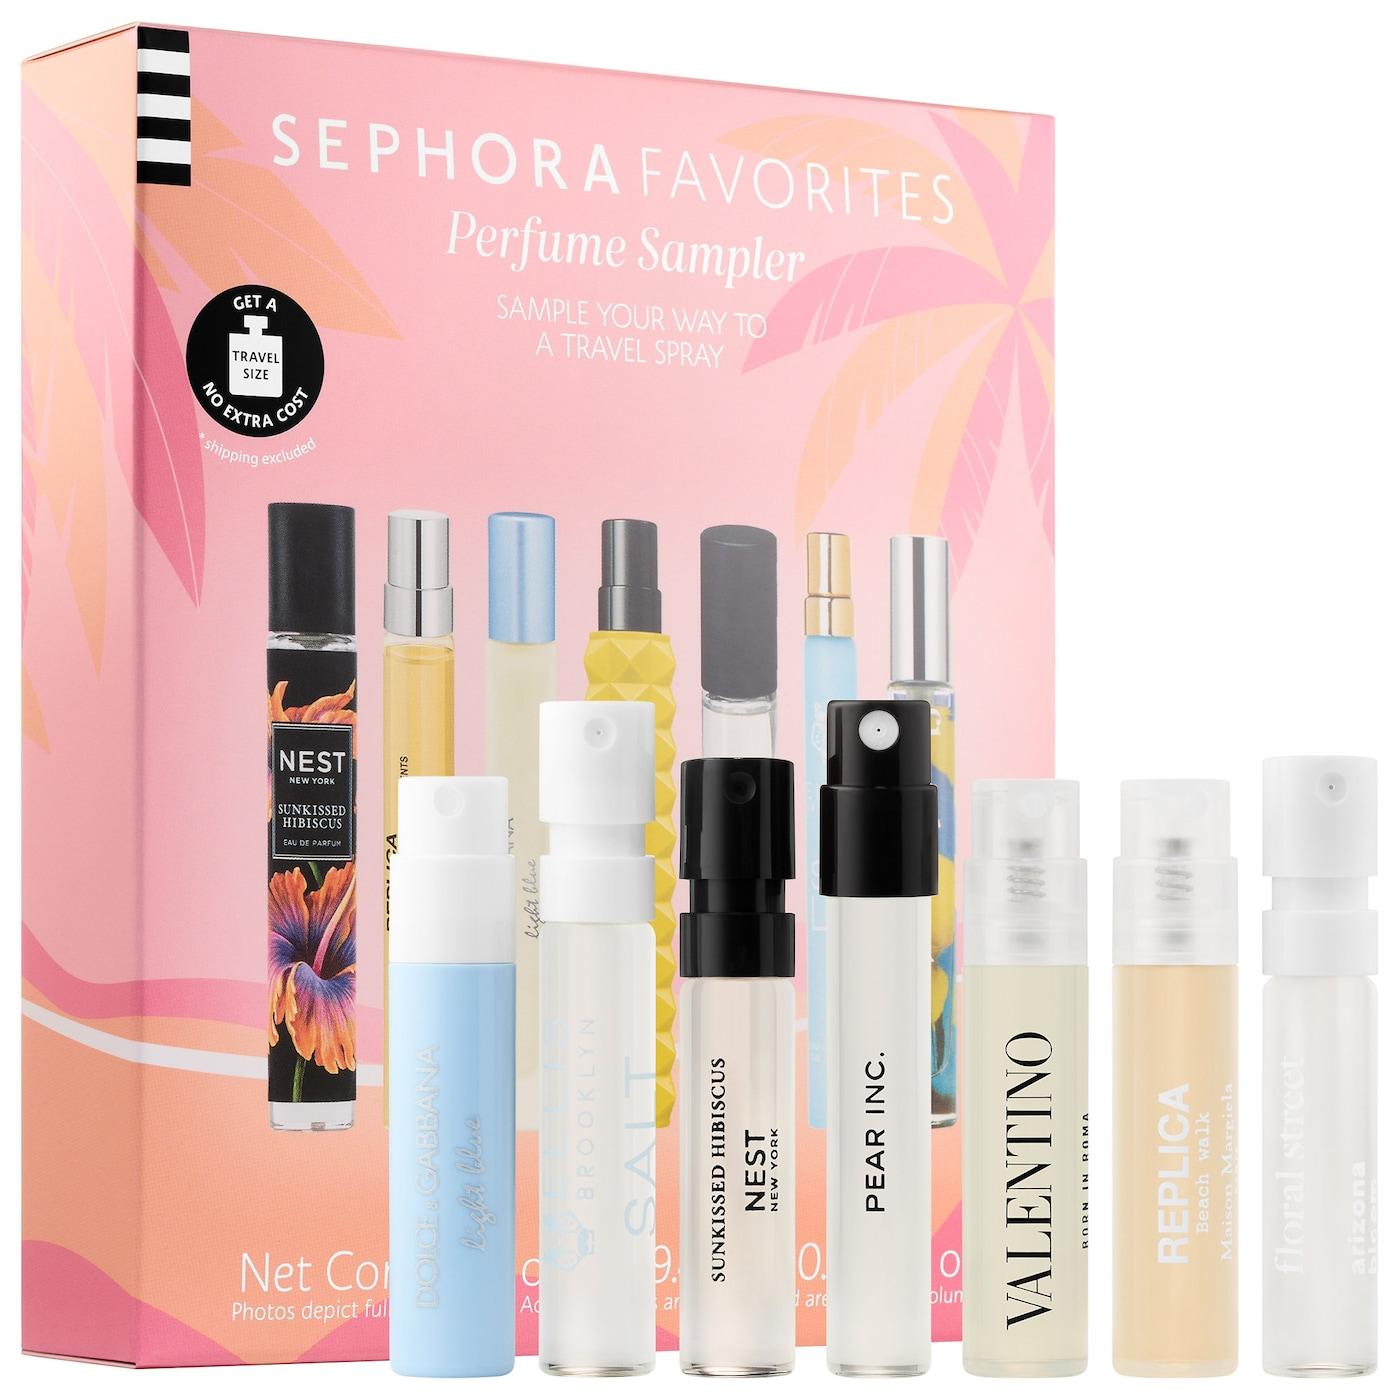 Sephora Favorites Bestselling Tropical Perfume Sampler Set – Now Available